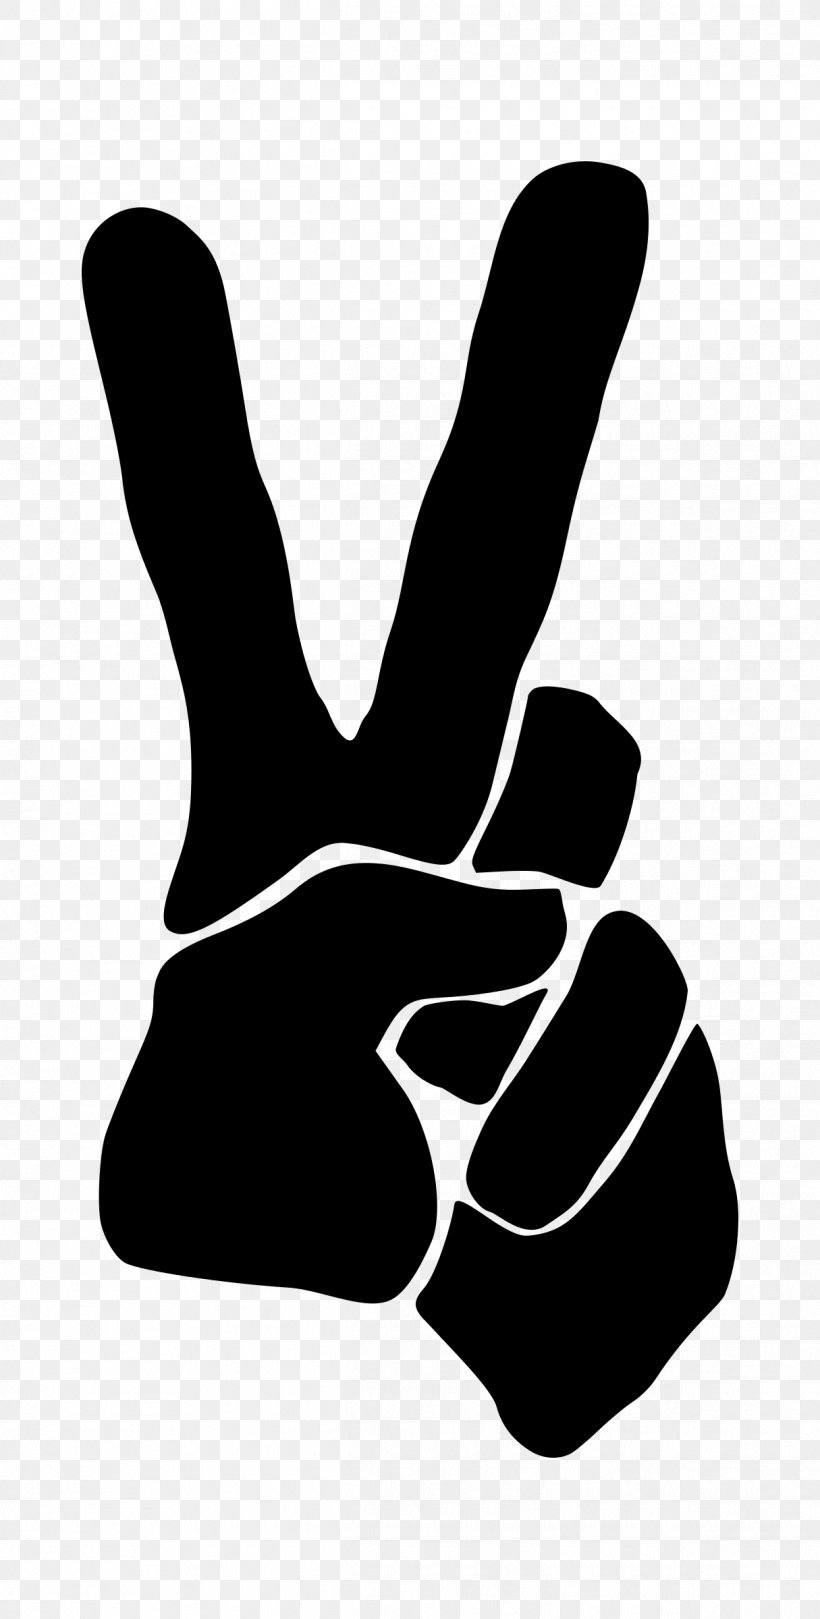 Peace Symbols V Sign Silhouette Clip Art, PNG, 1215x2400px, Peace Symbols, Black, Black And White, Doves As Symbols, Drawing Download Free